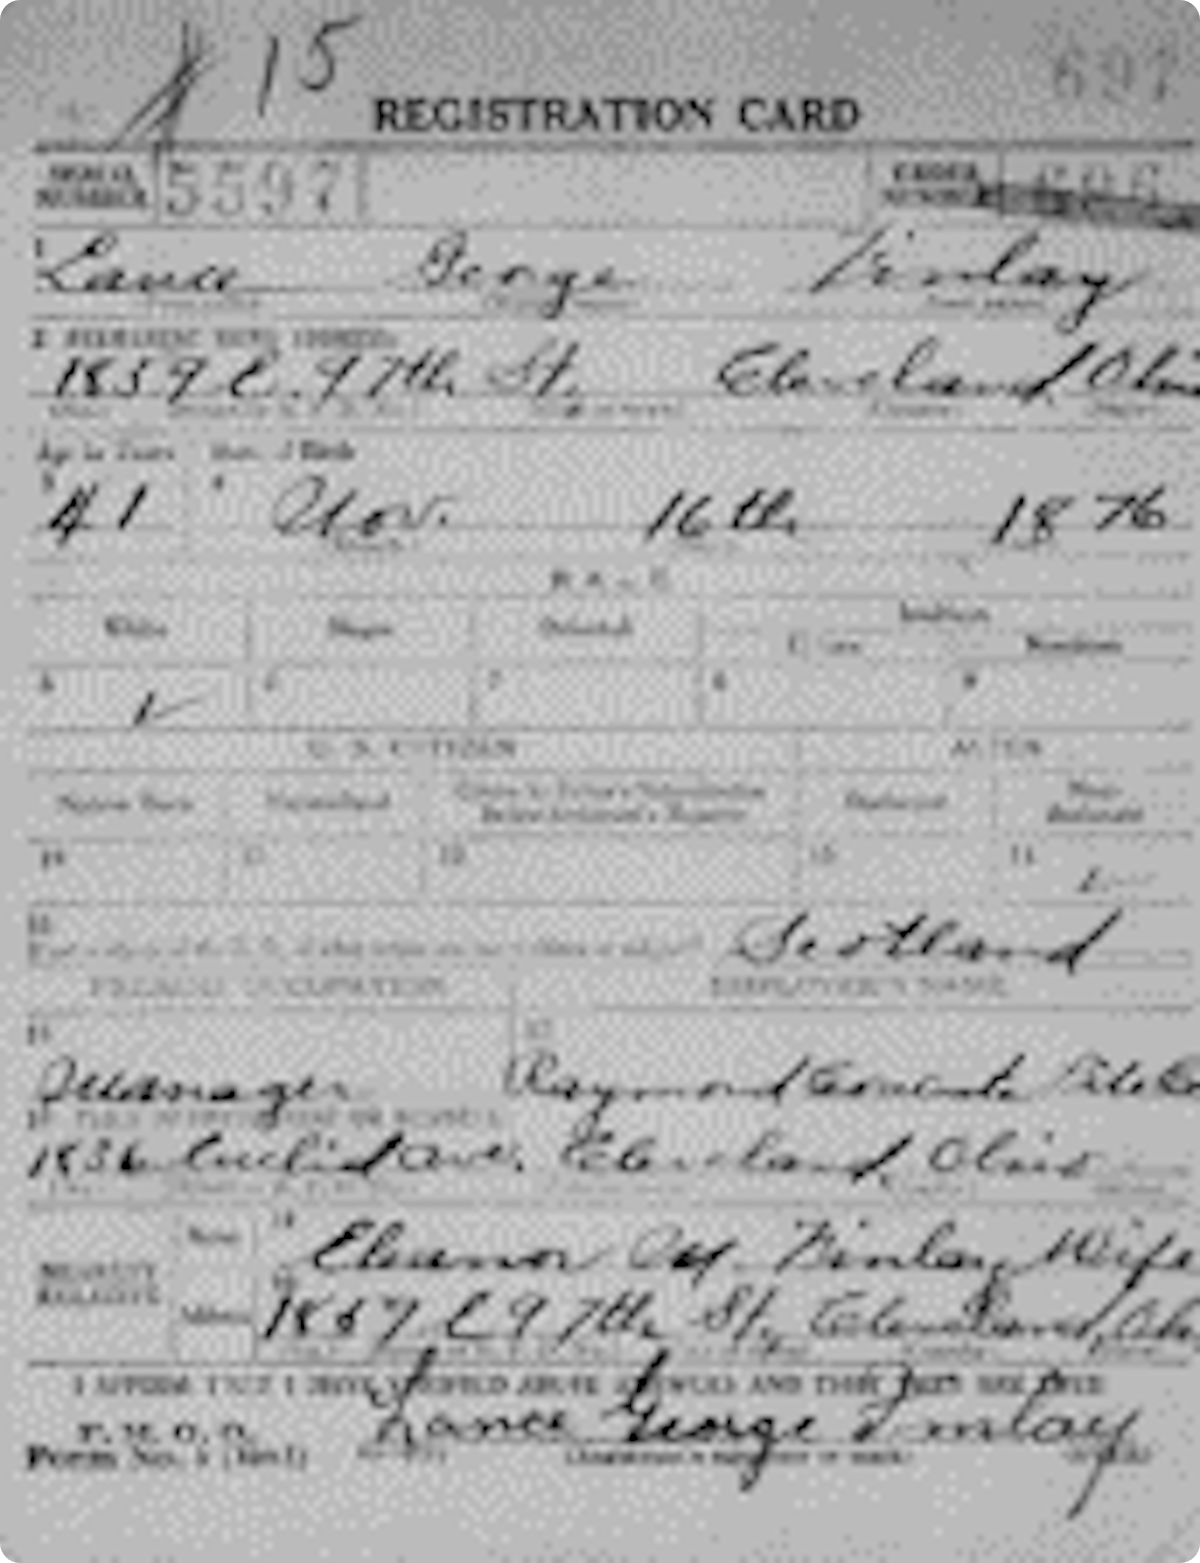 Lance’s WW1 draft registration card from 1918